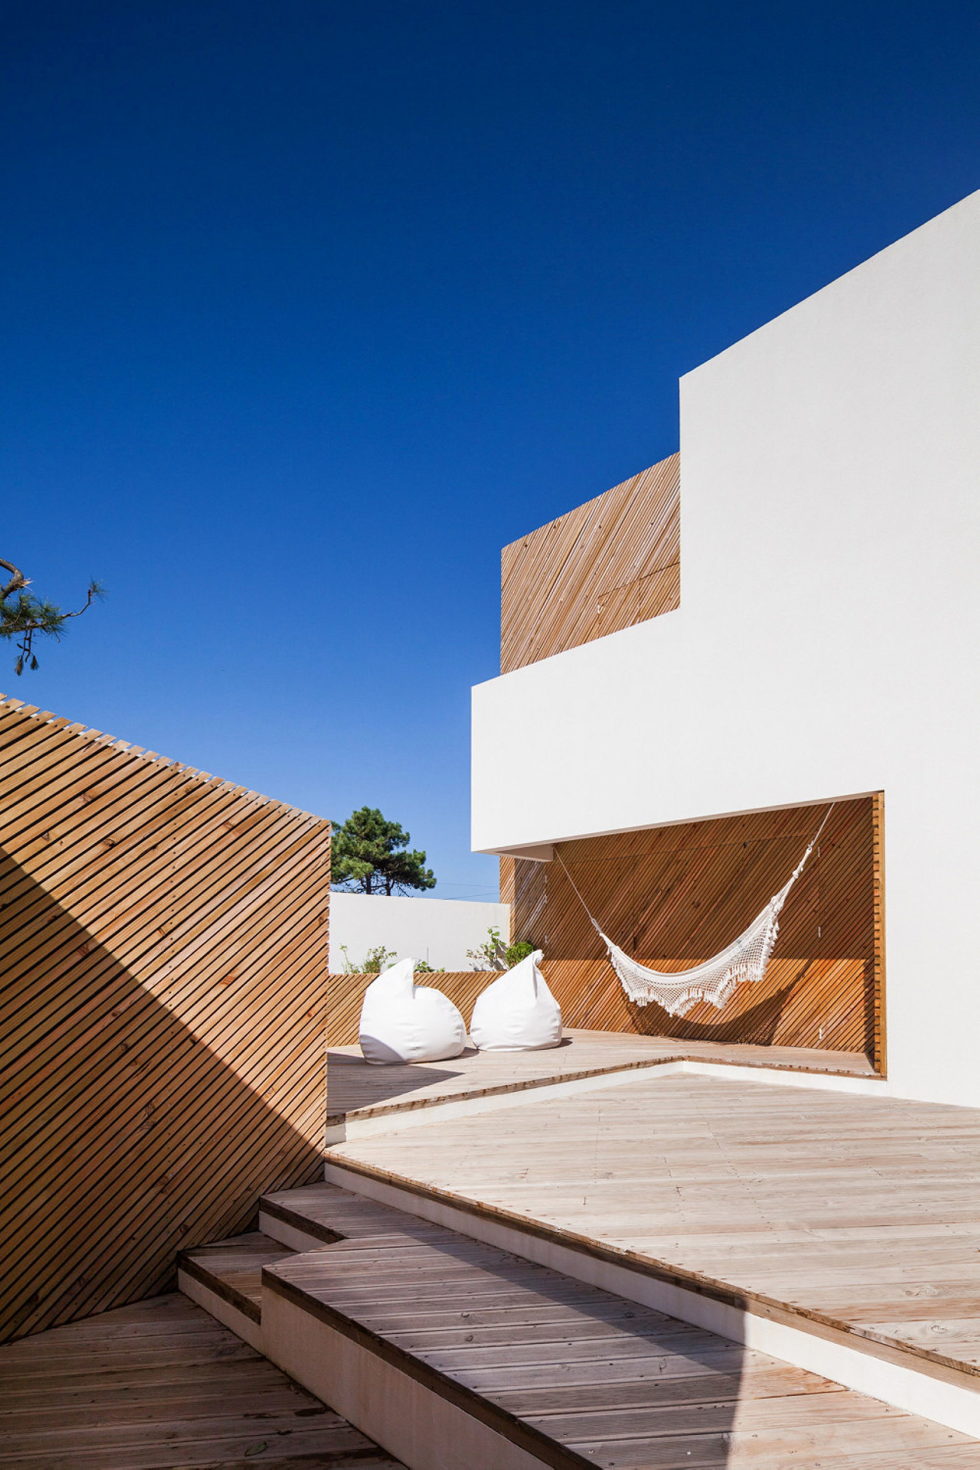 SilverWoodHouse Project In Portugal From 3r Ernesto Pereira Studio 4